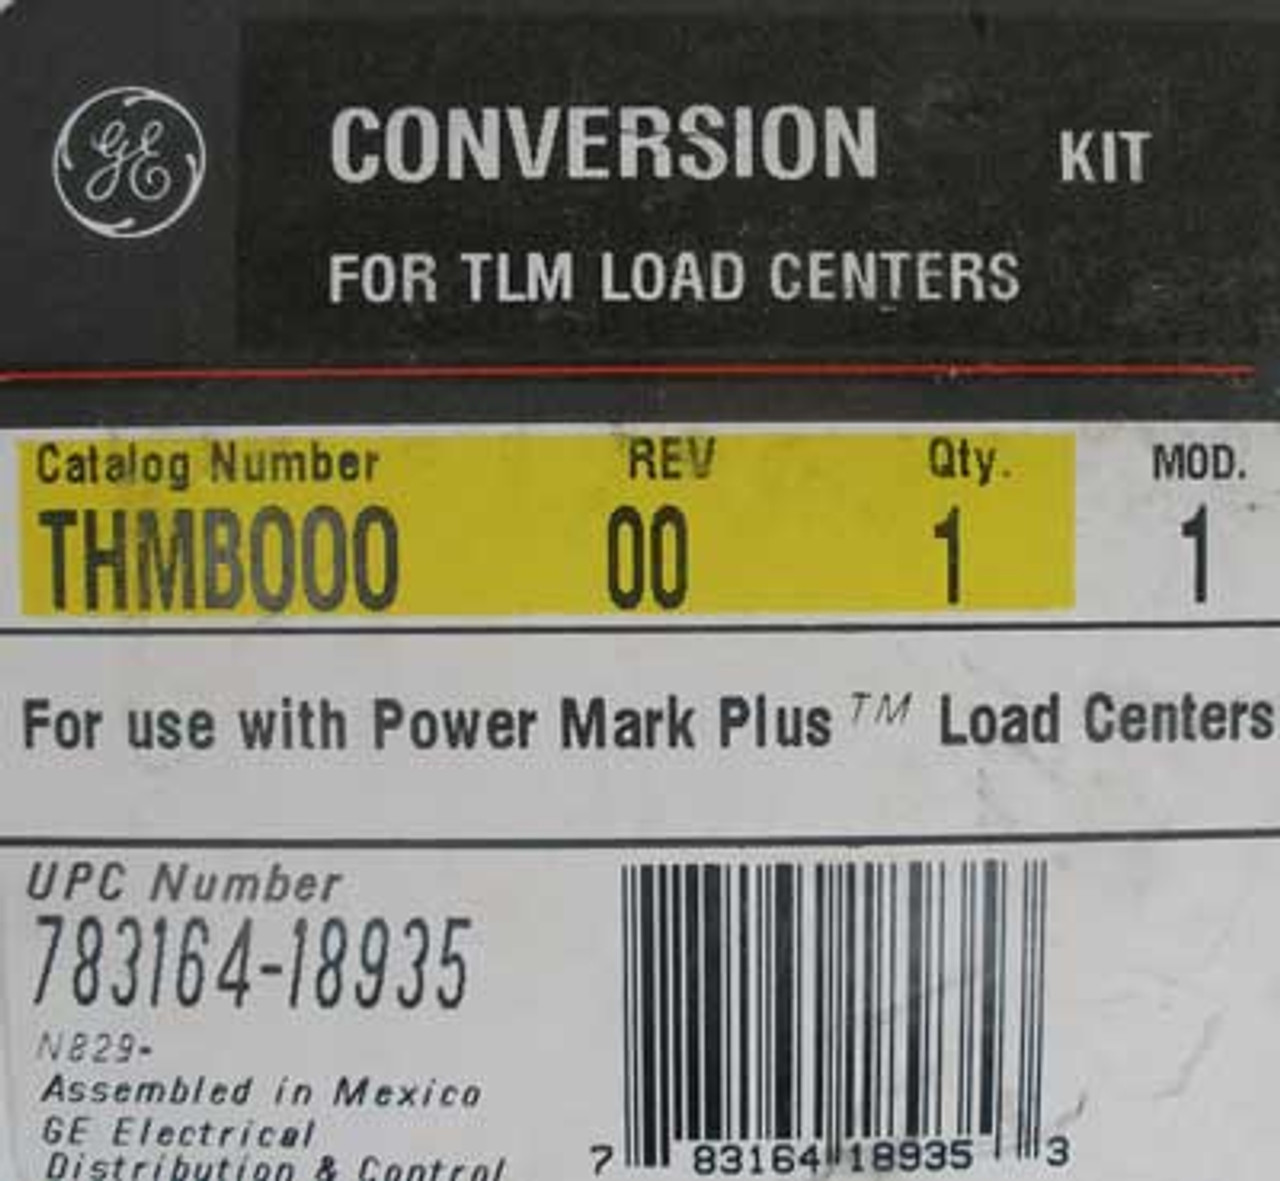 GE THMB000 Conversion Kit for Power Mark+ Load Centers - New